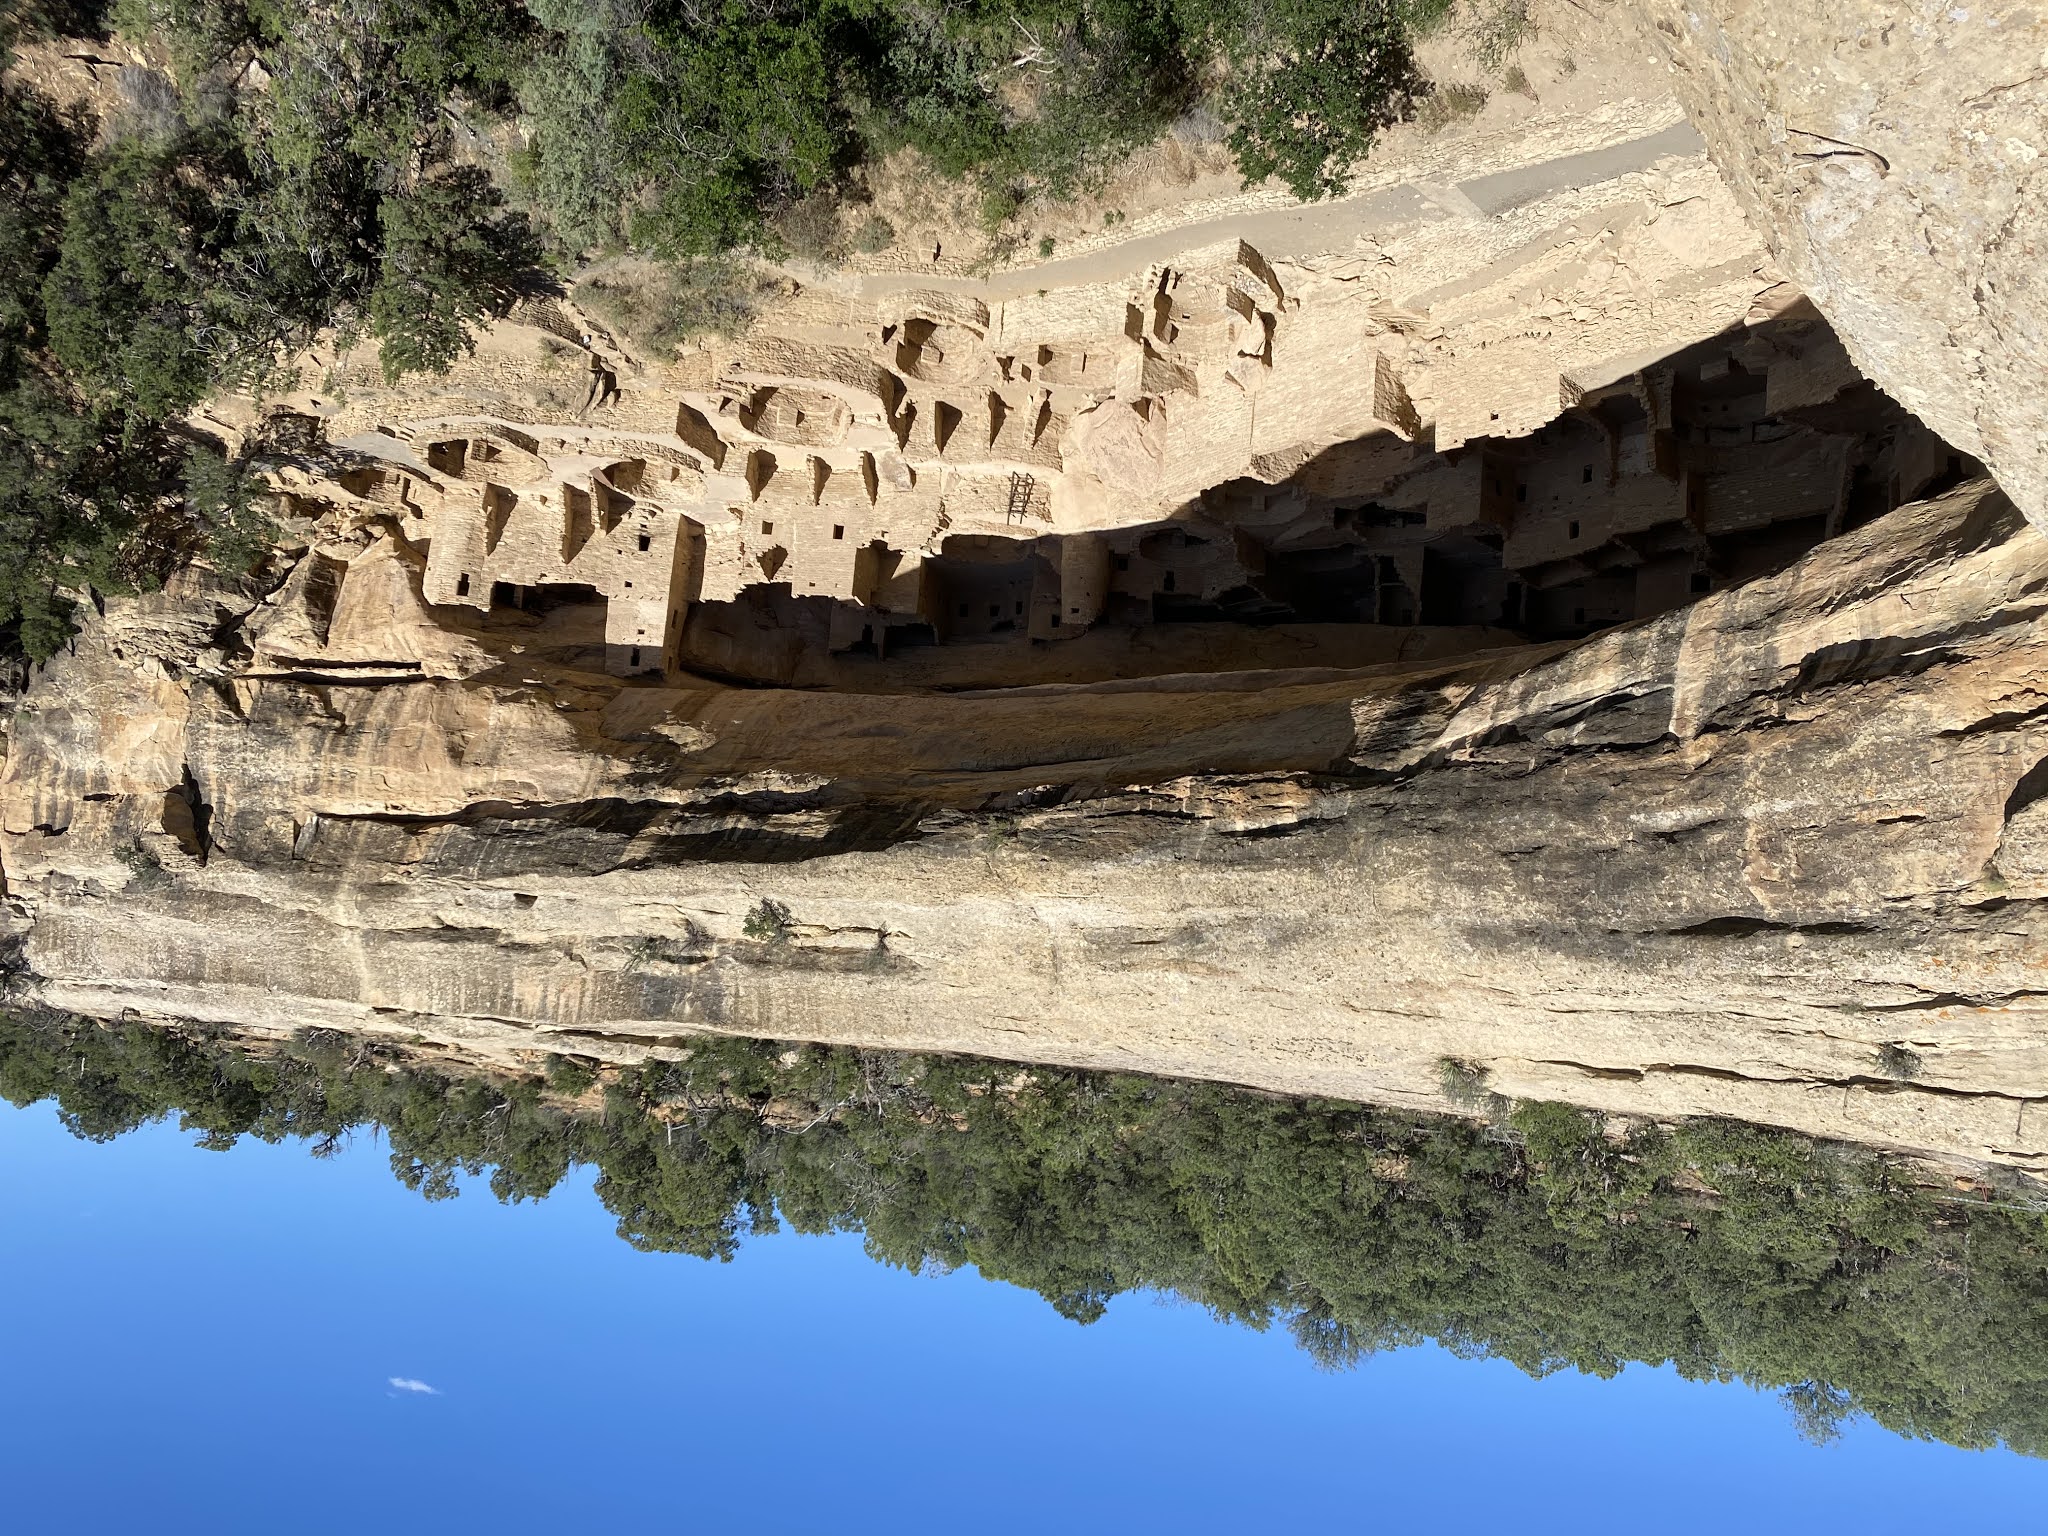 Mesa Verde Cliff Dwelling, The Palace | biblio-style.com